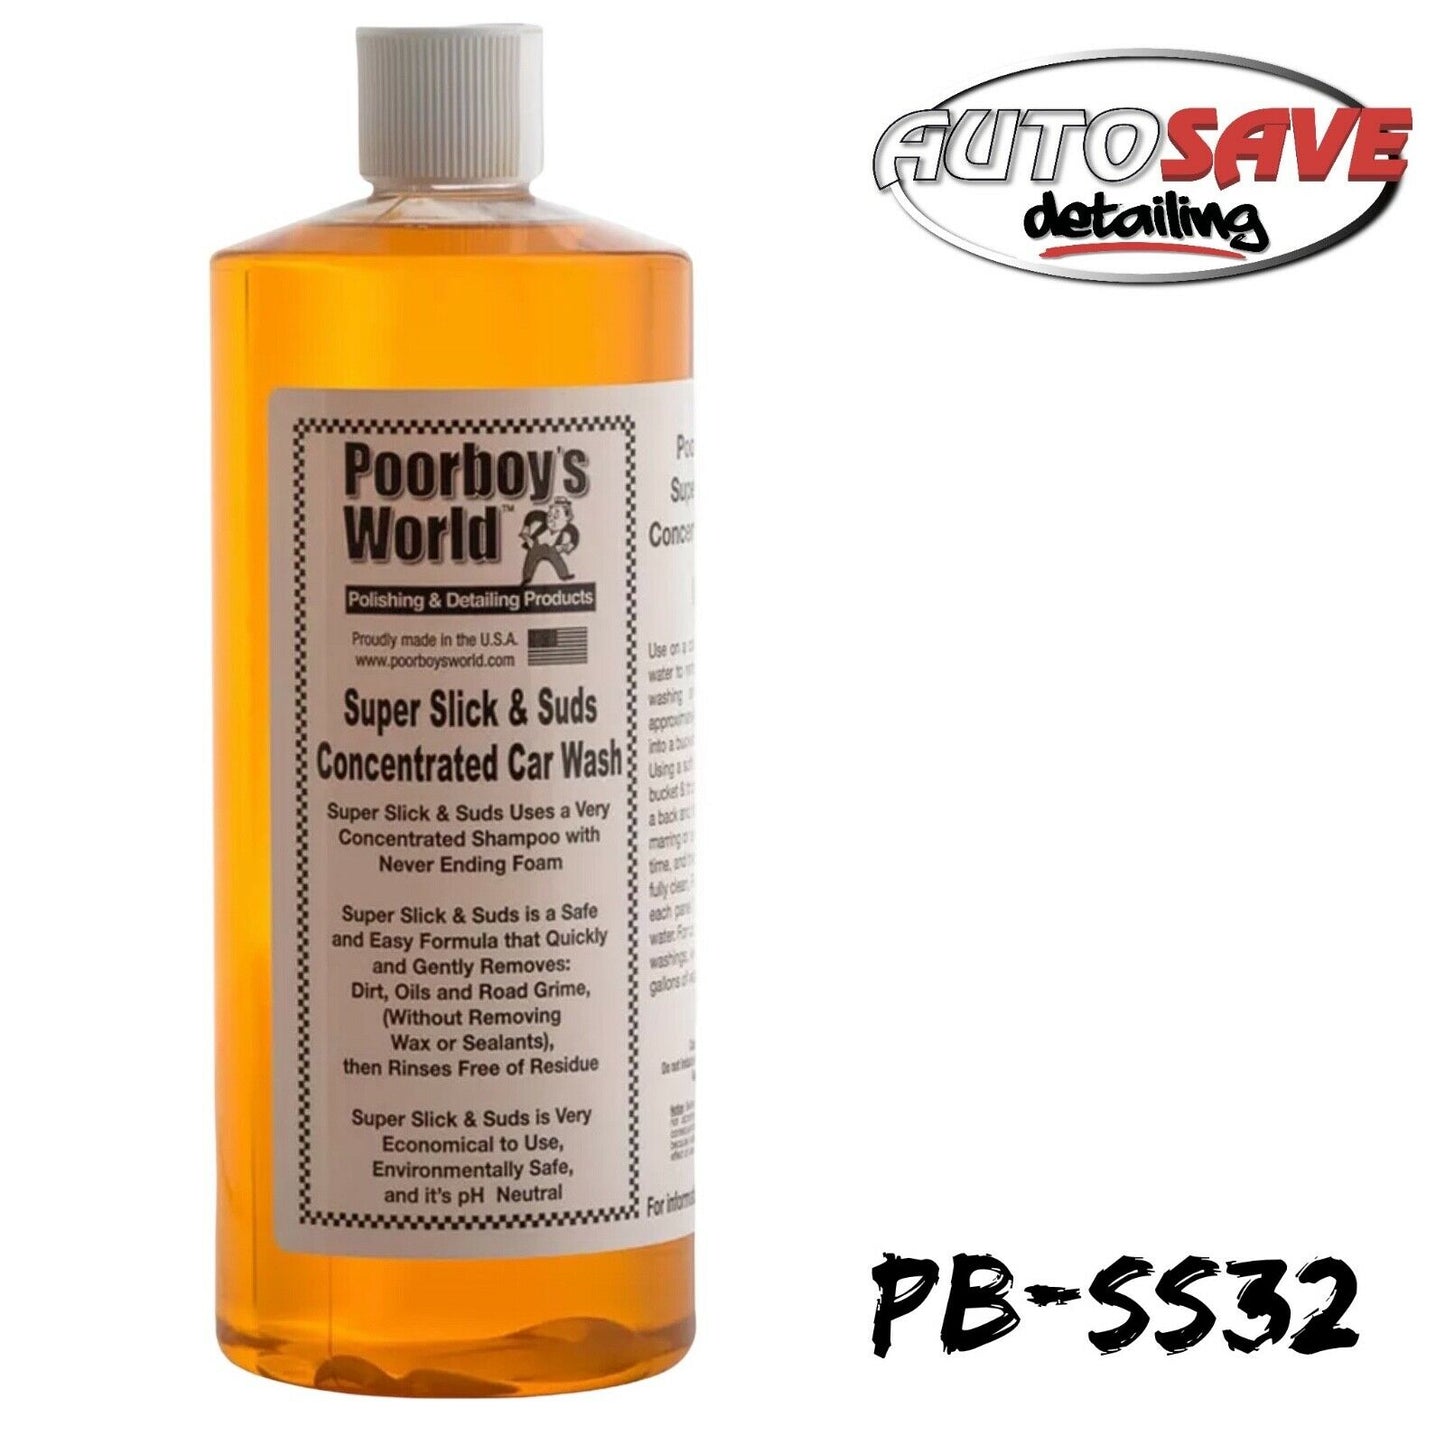 Poorboys Super Slick & Suds Concentrated Car Wash Shampoo 946mL